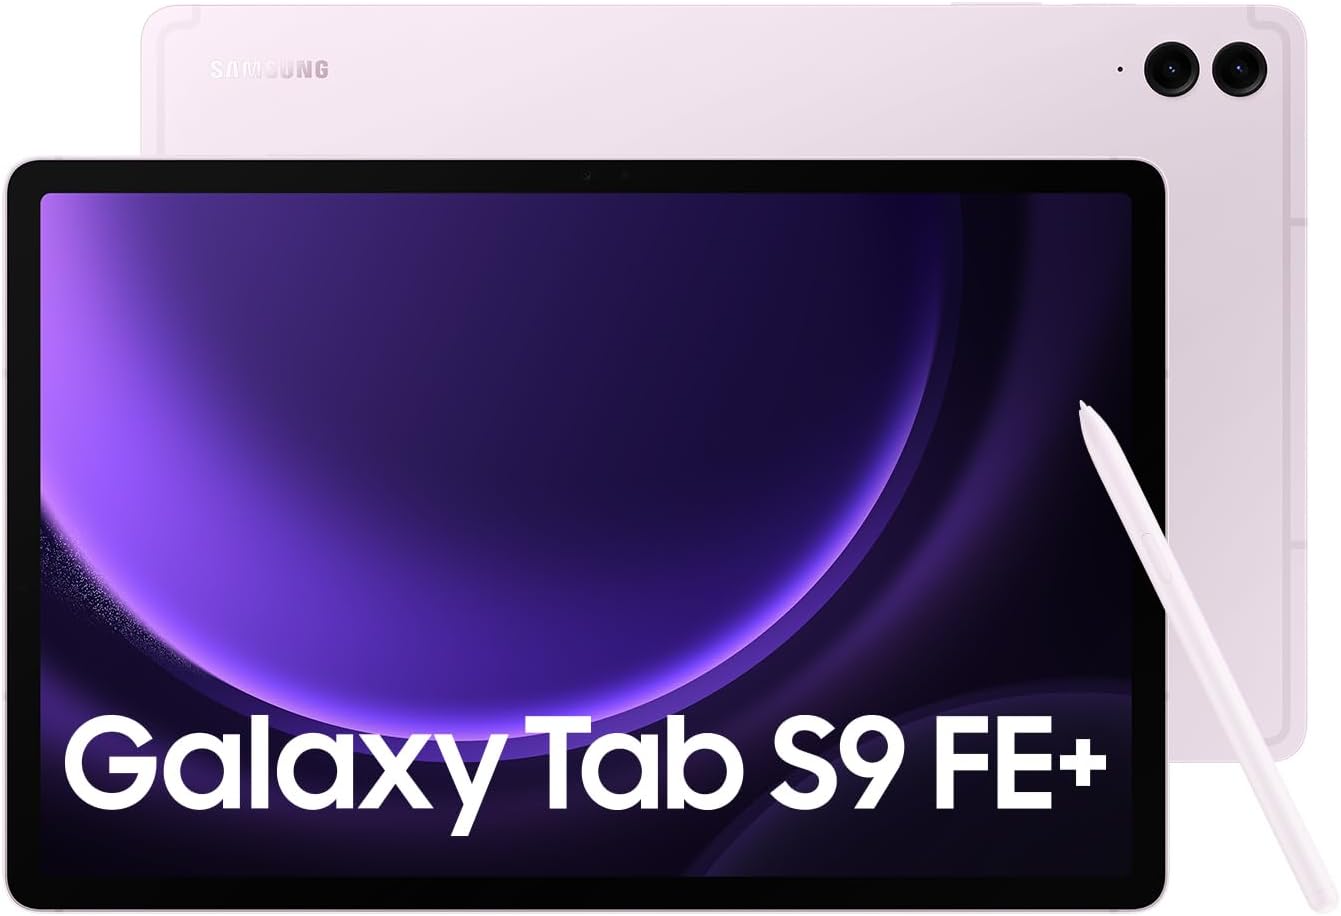 Lavender Samsung Galaxy Tab S9 FE+ 12.4 5G Android Tablet - Colorful design for creative possibilities and entertainment. 8806095170336